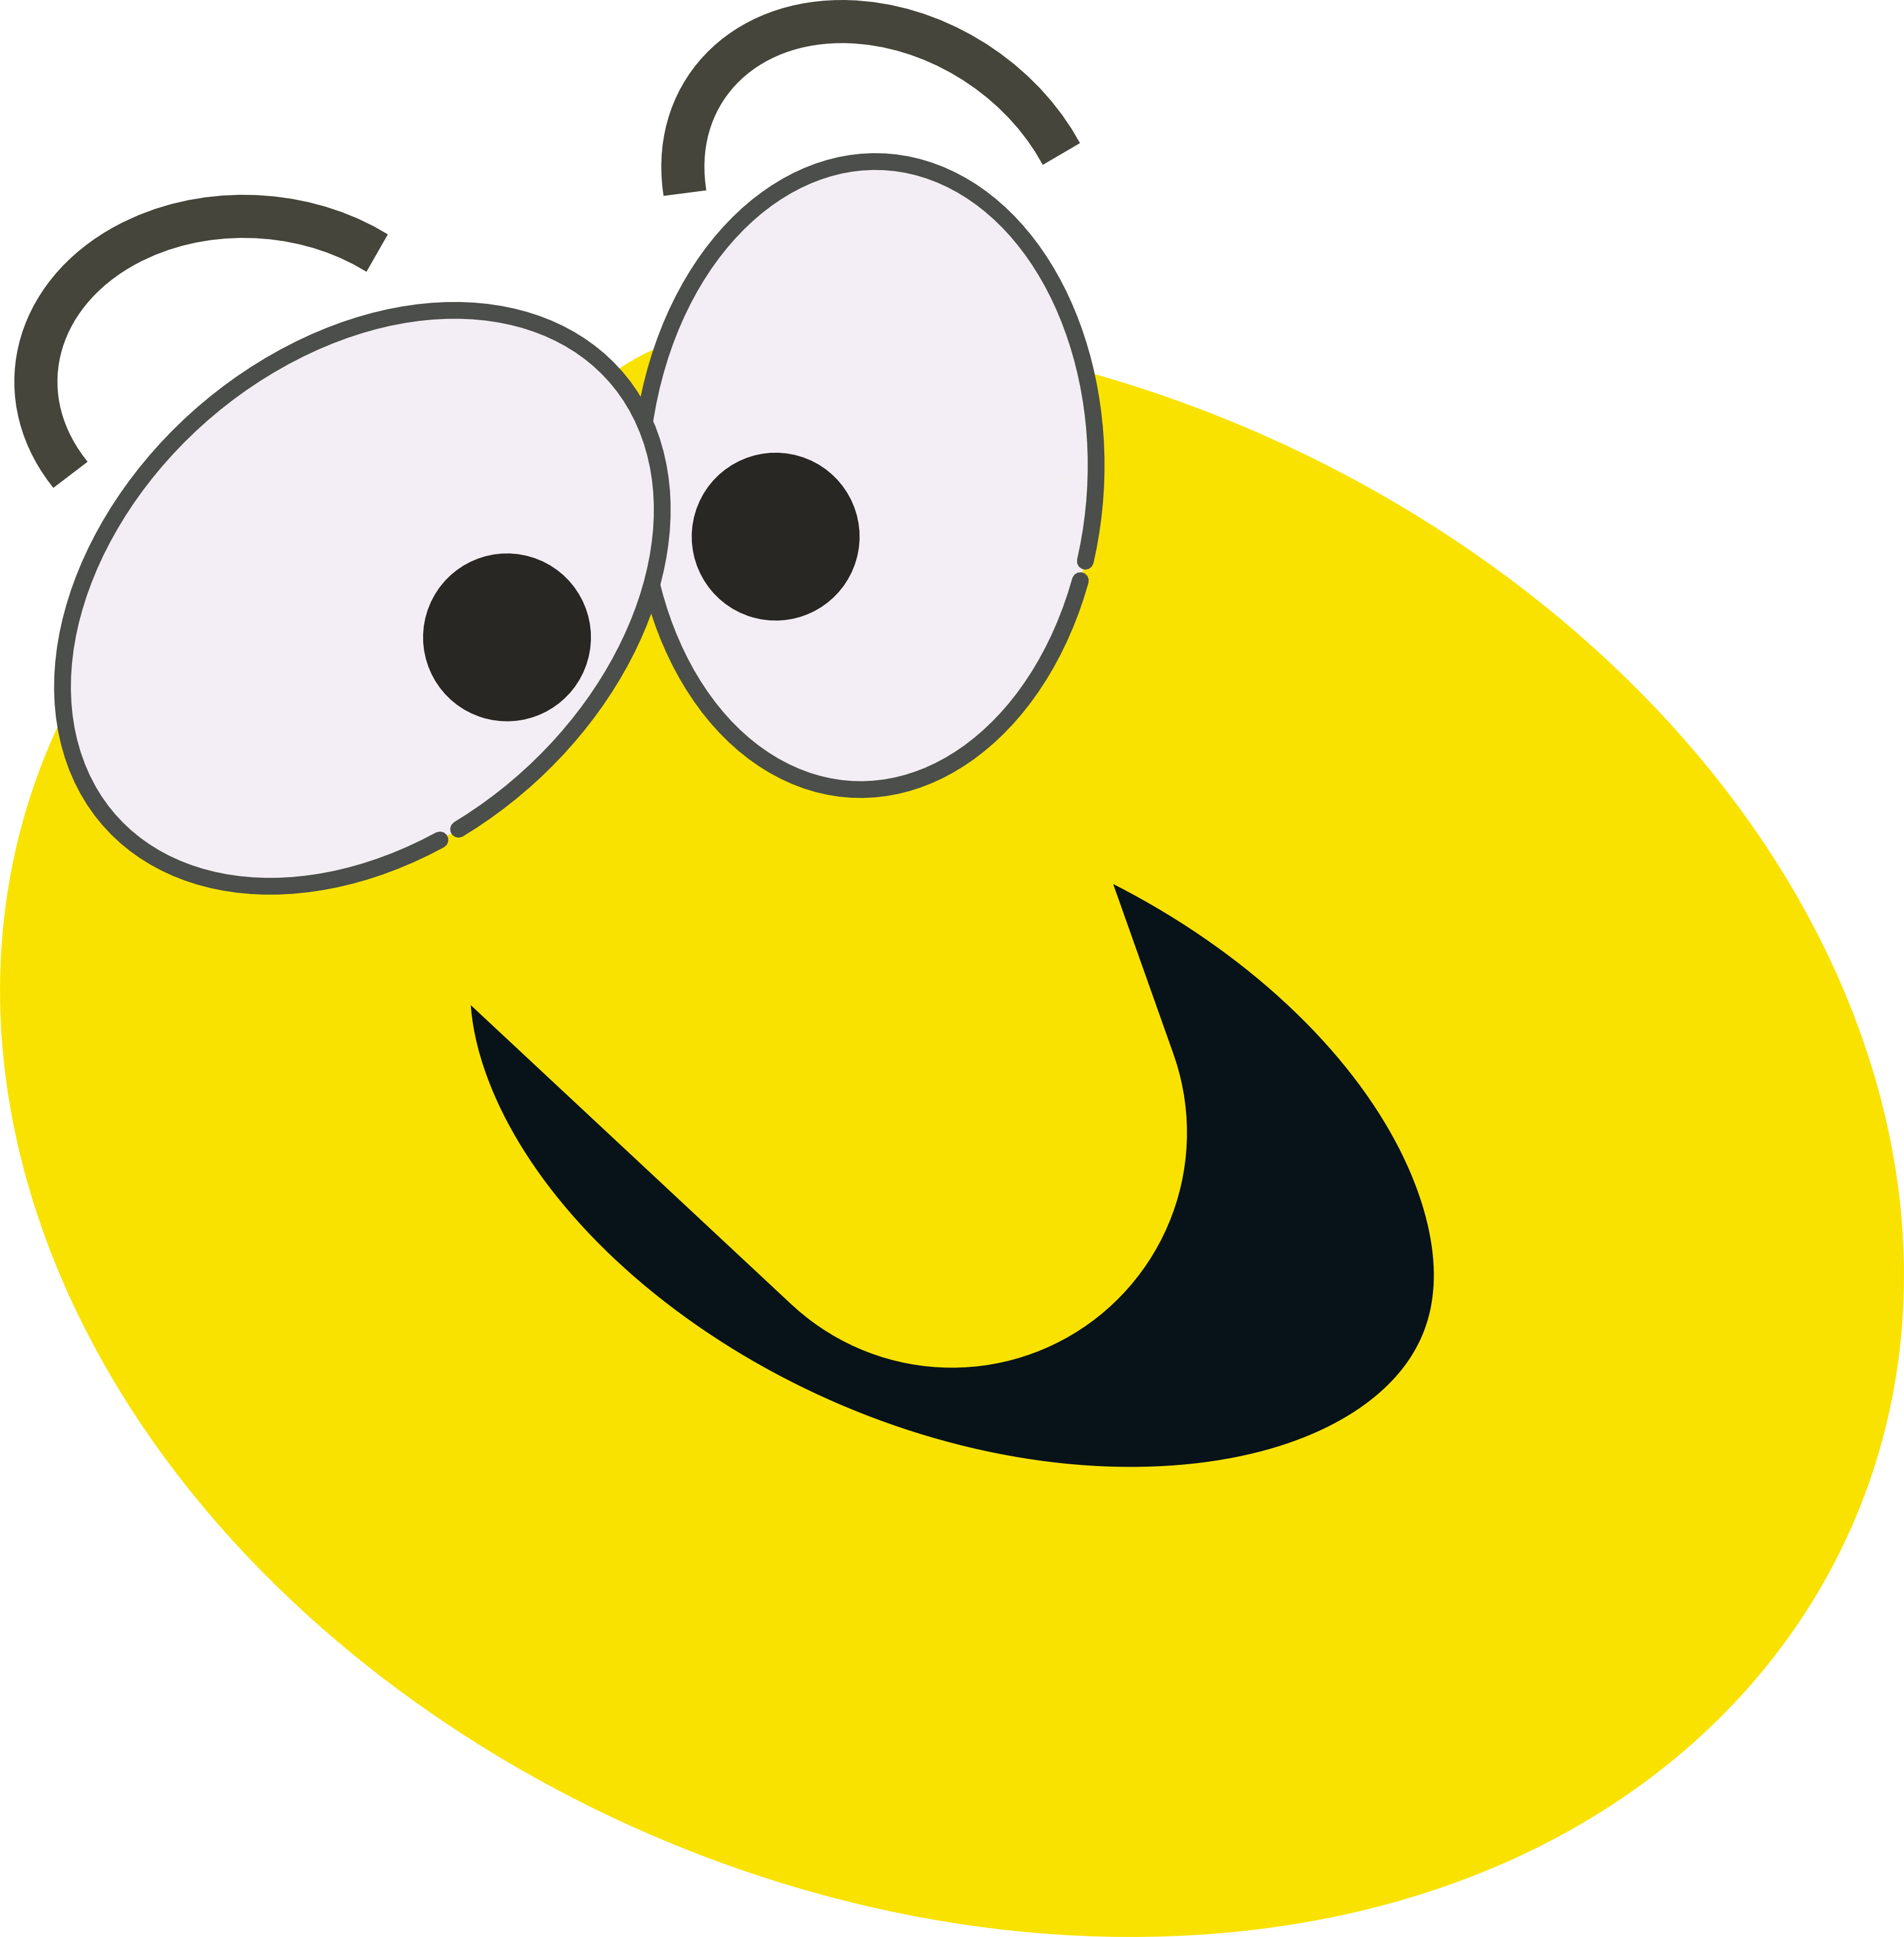 Funny Faces Cartoon Pictures - ClipArt Best